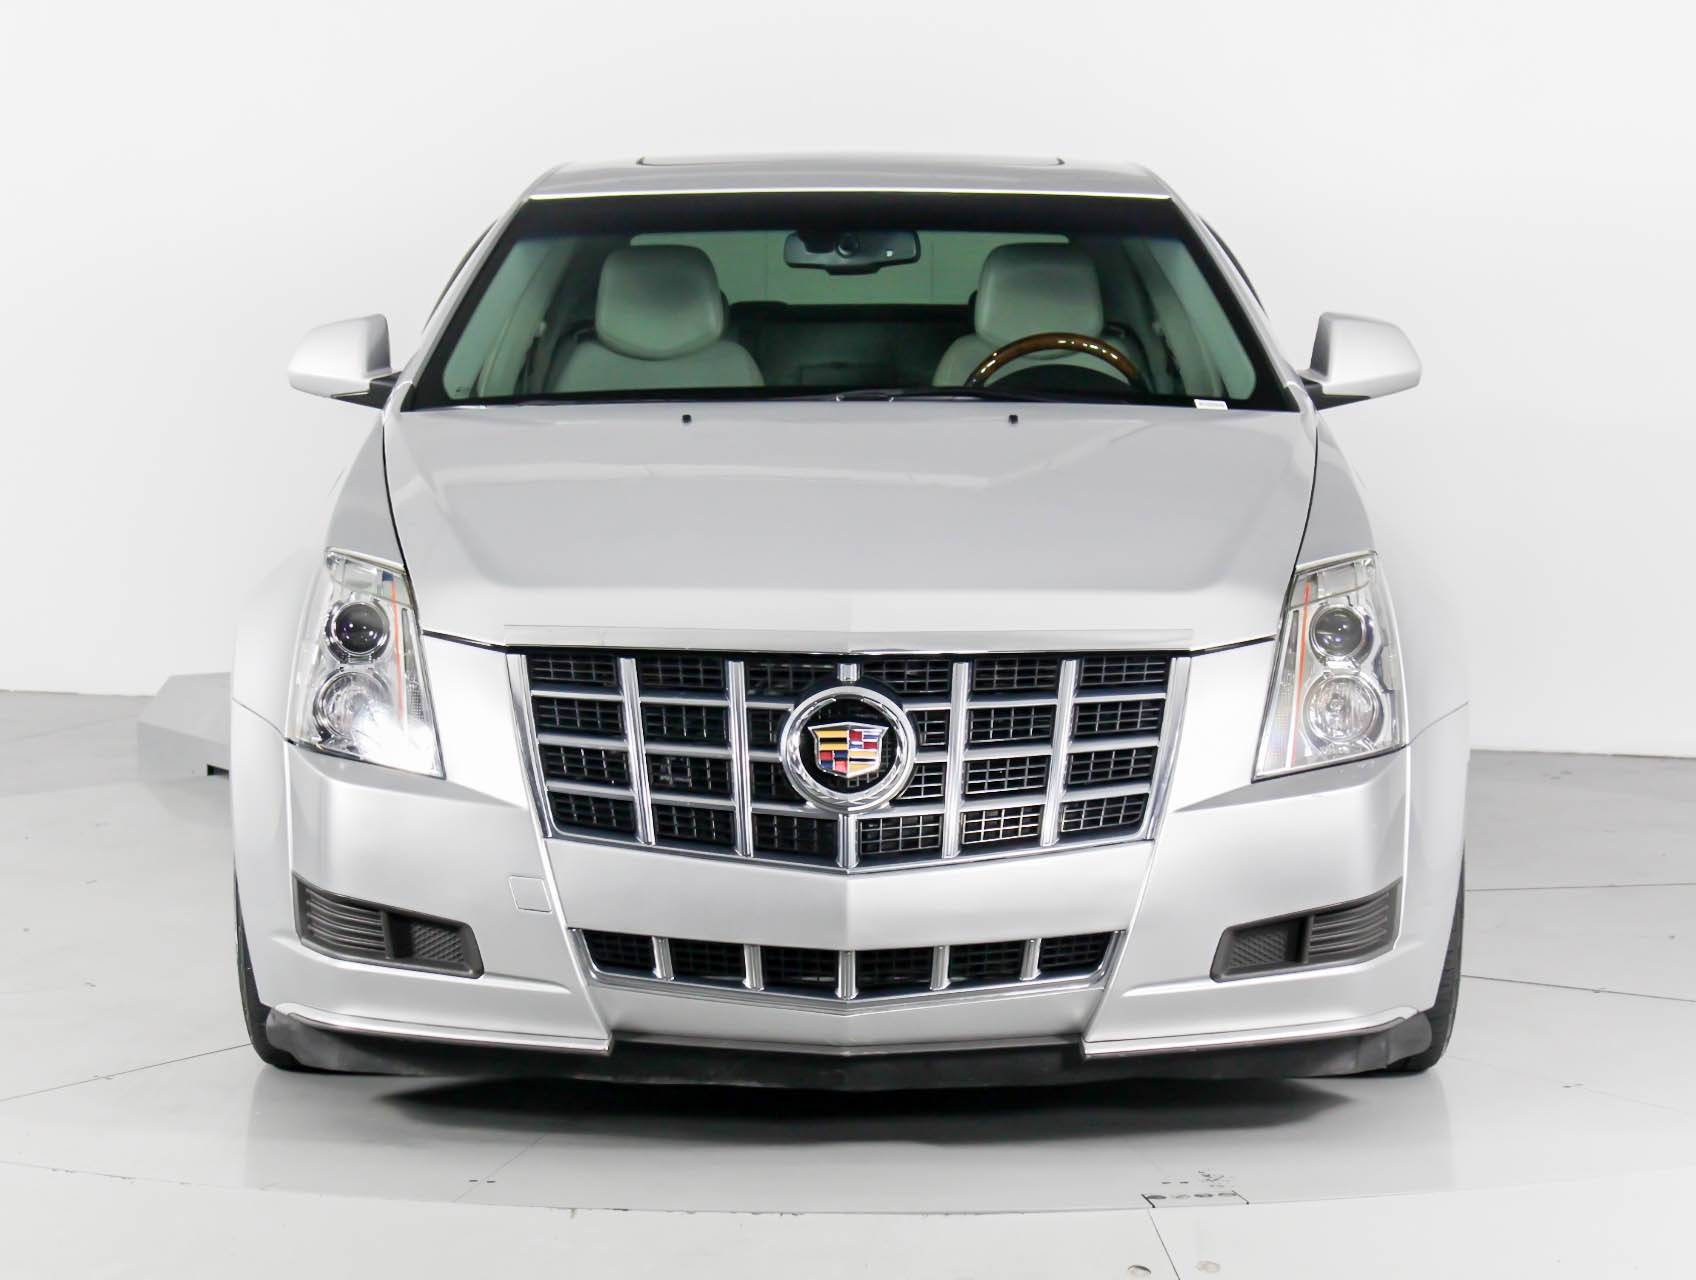 Florida Fine Cars - Used CADILLAC CTS 2012 WEST PALM LUXURY